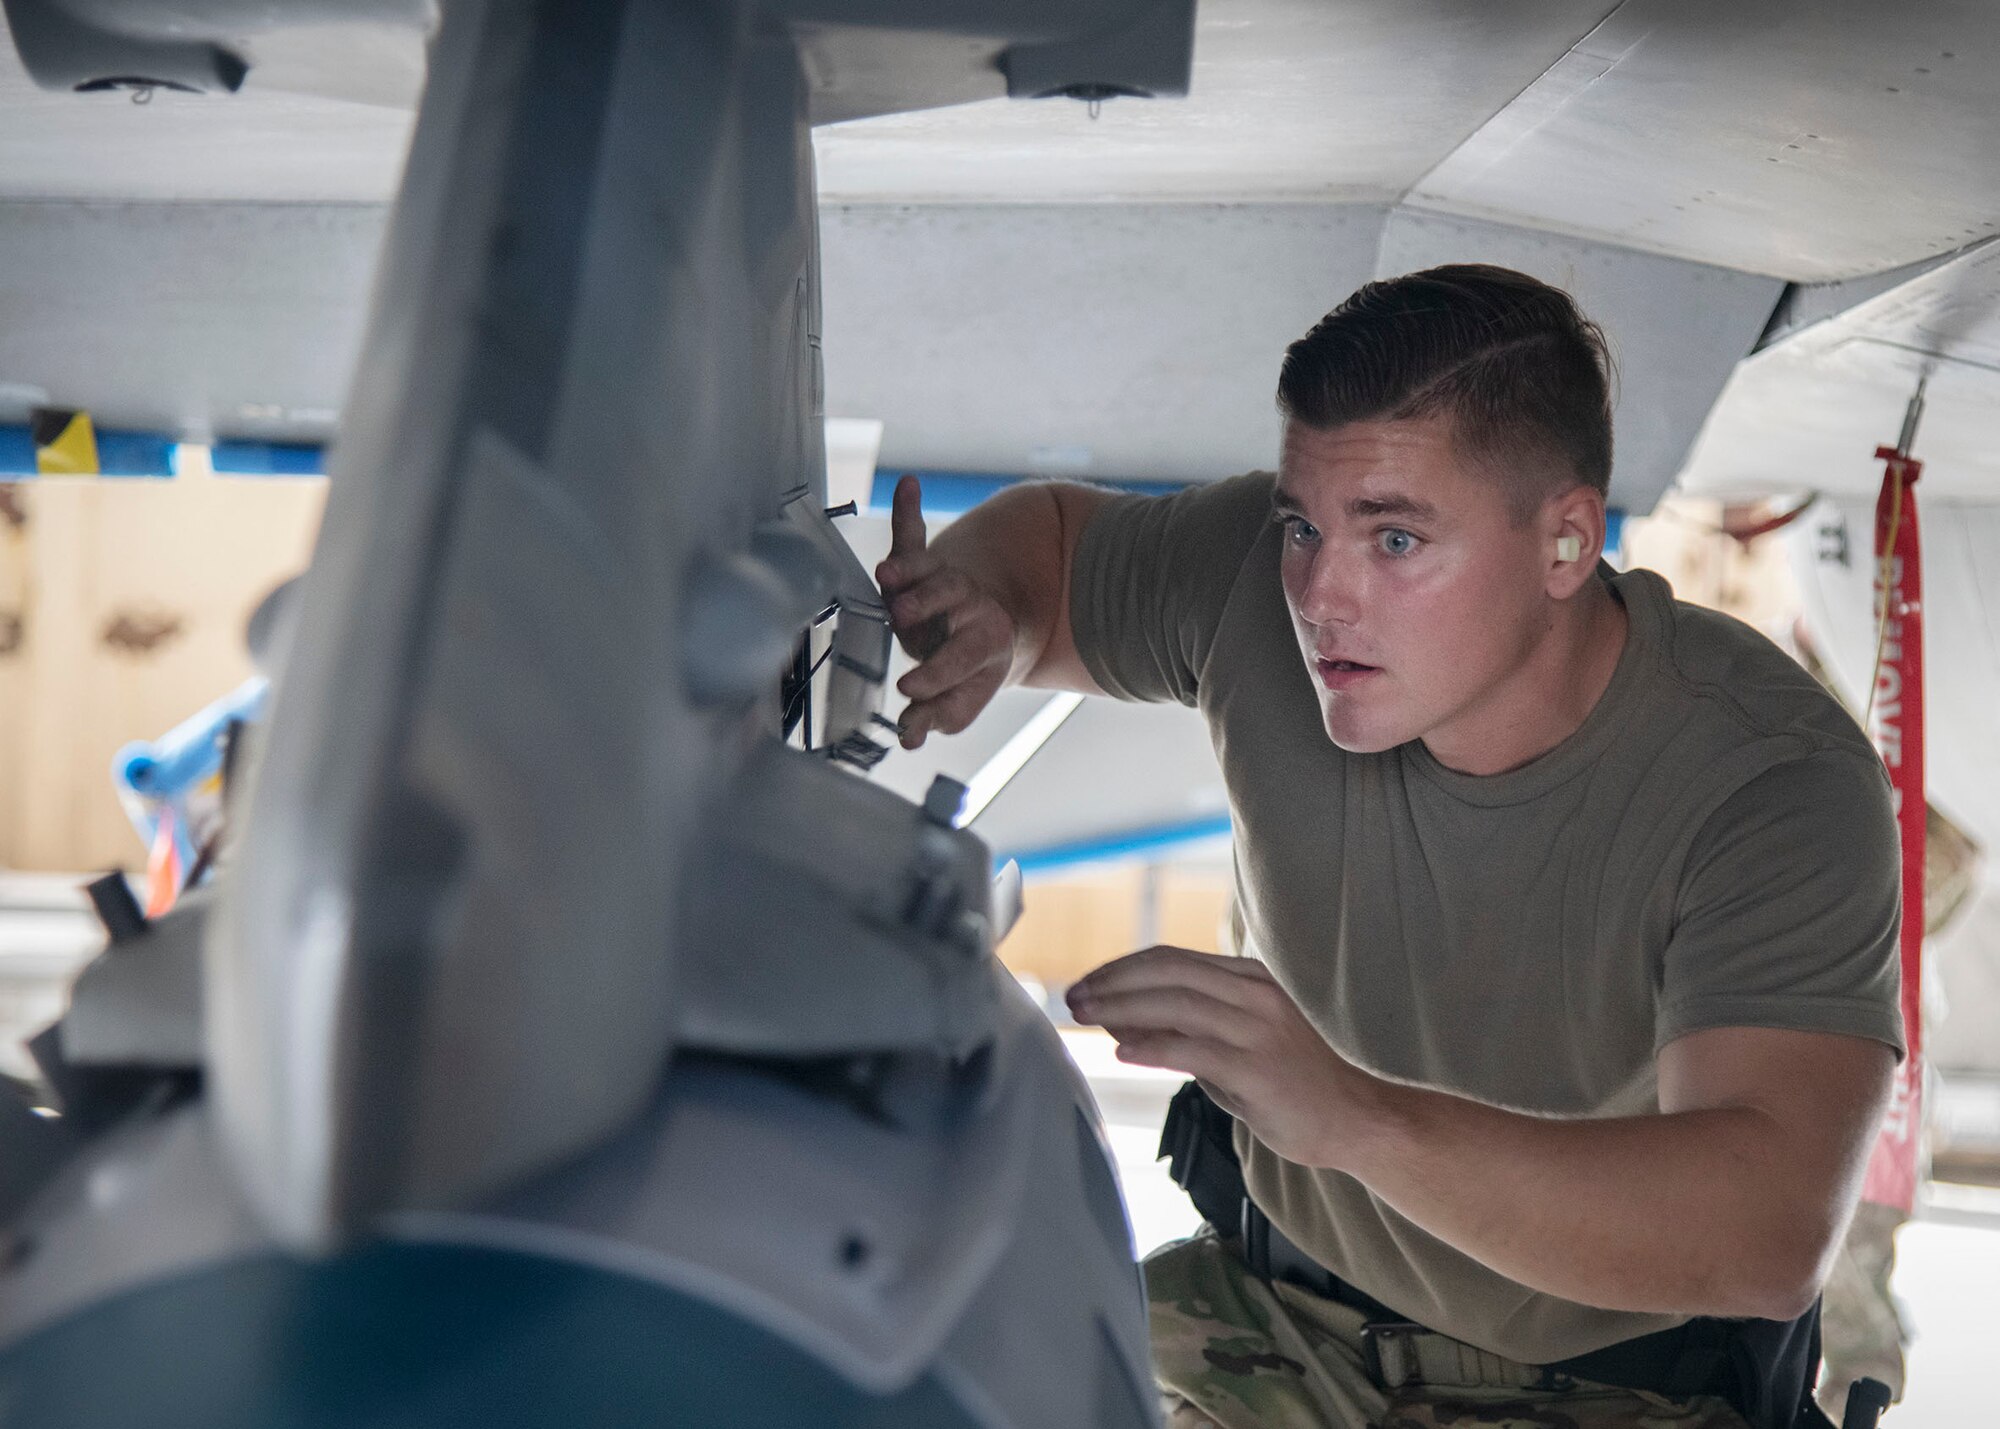 An Airman rushes to finalize pre-load procedures on an F-16 Falcon.